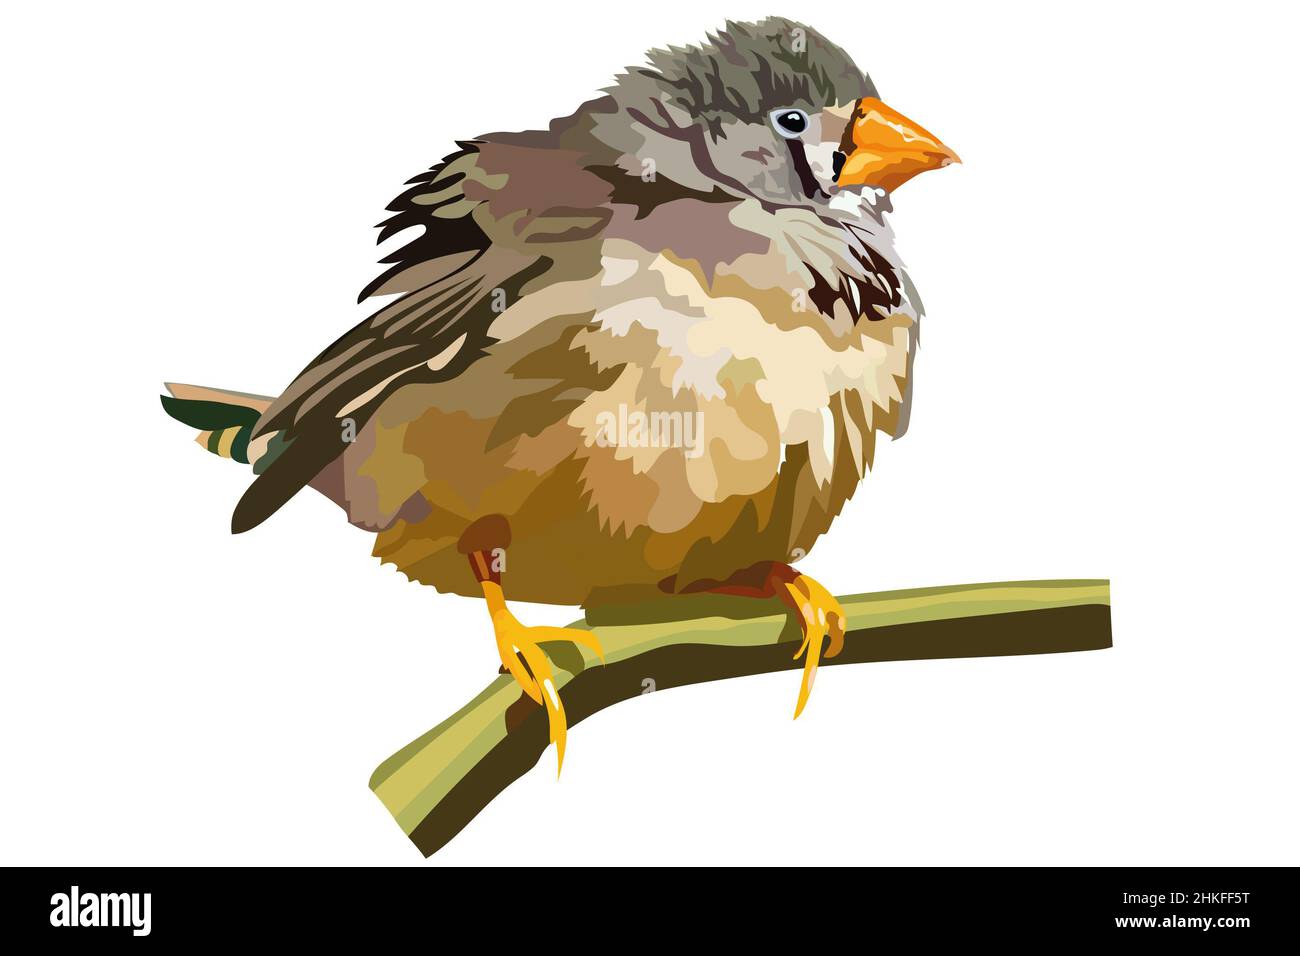 vector image of a small bird with a yellow beak sitting on a branch Stock Photo